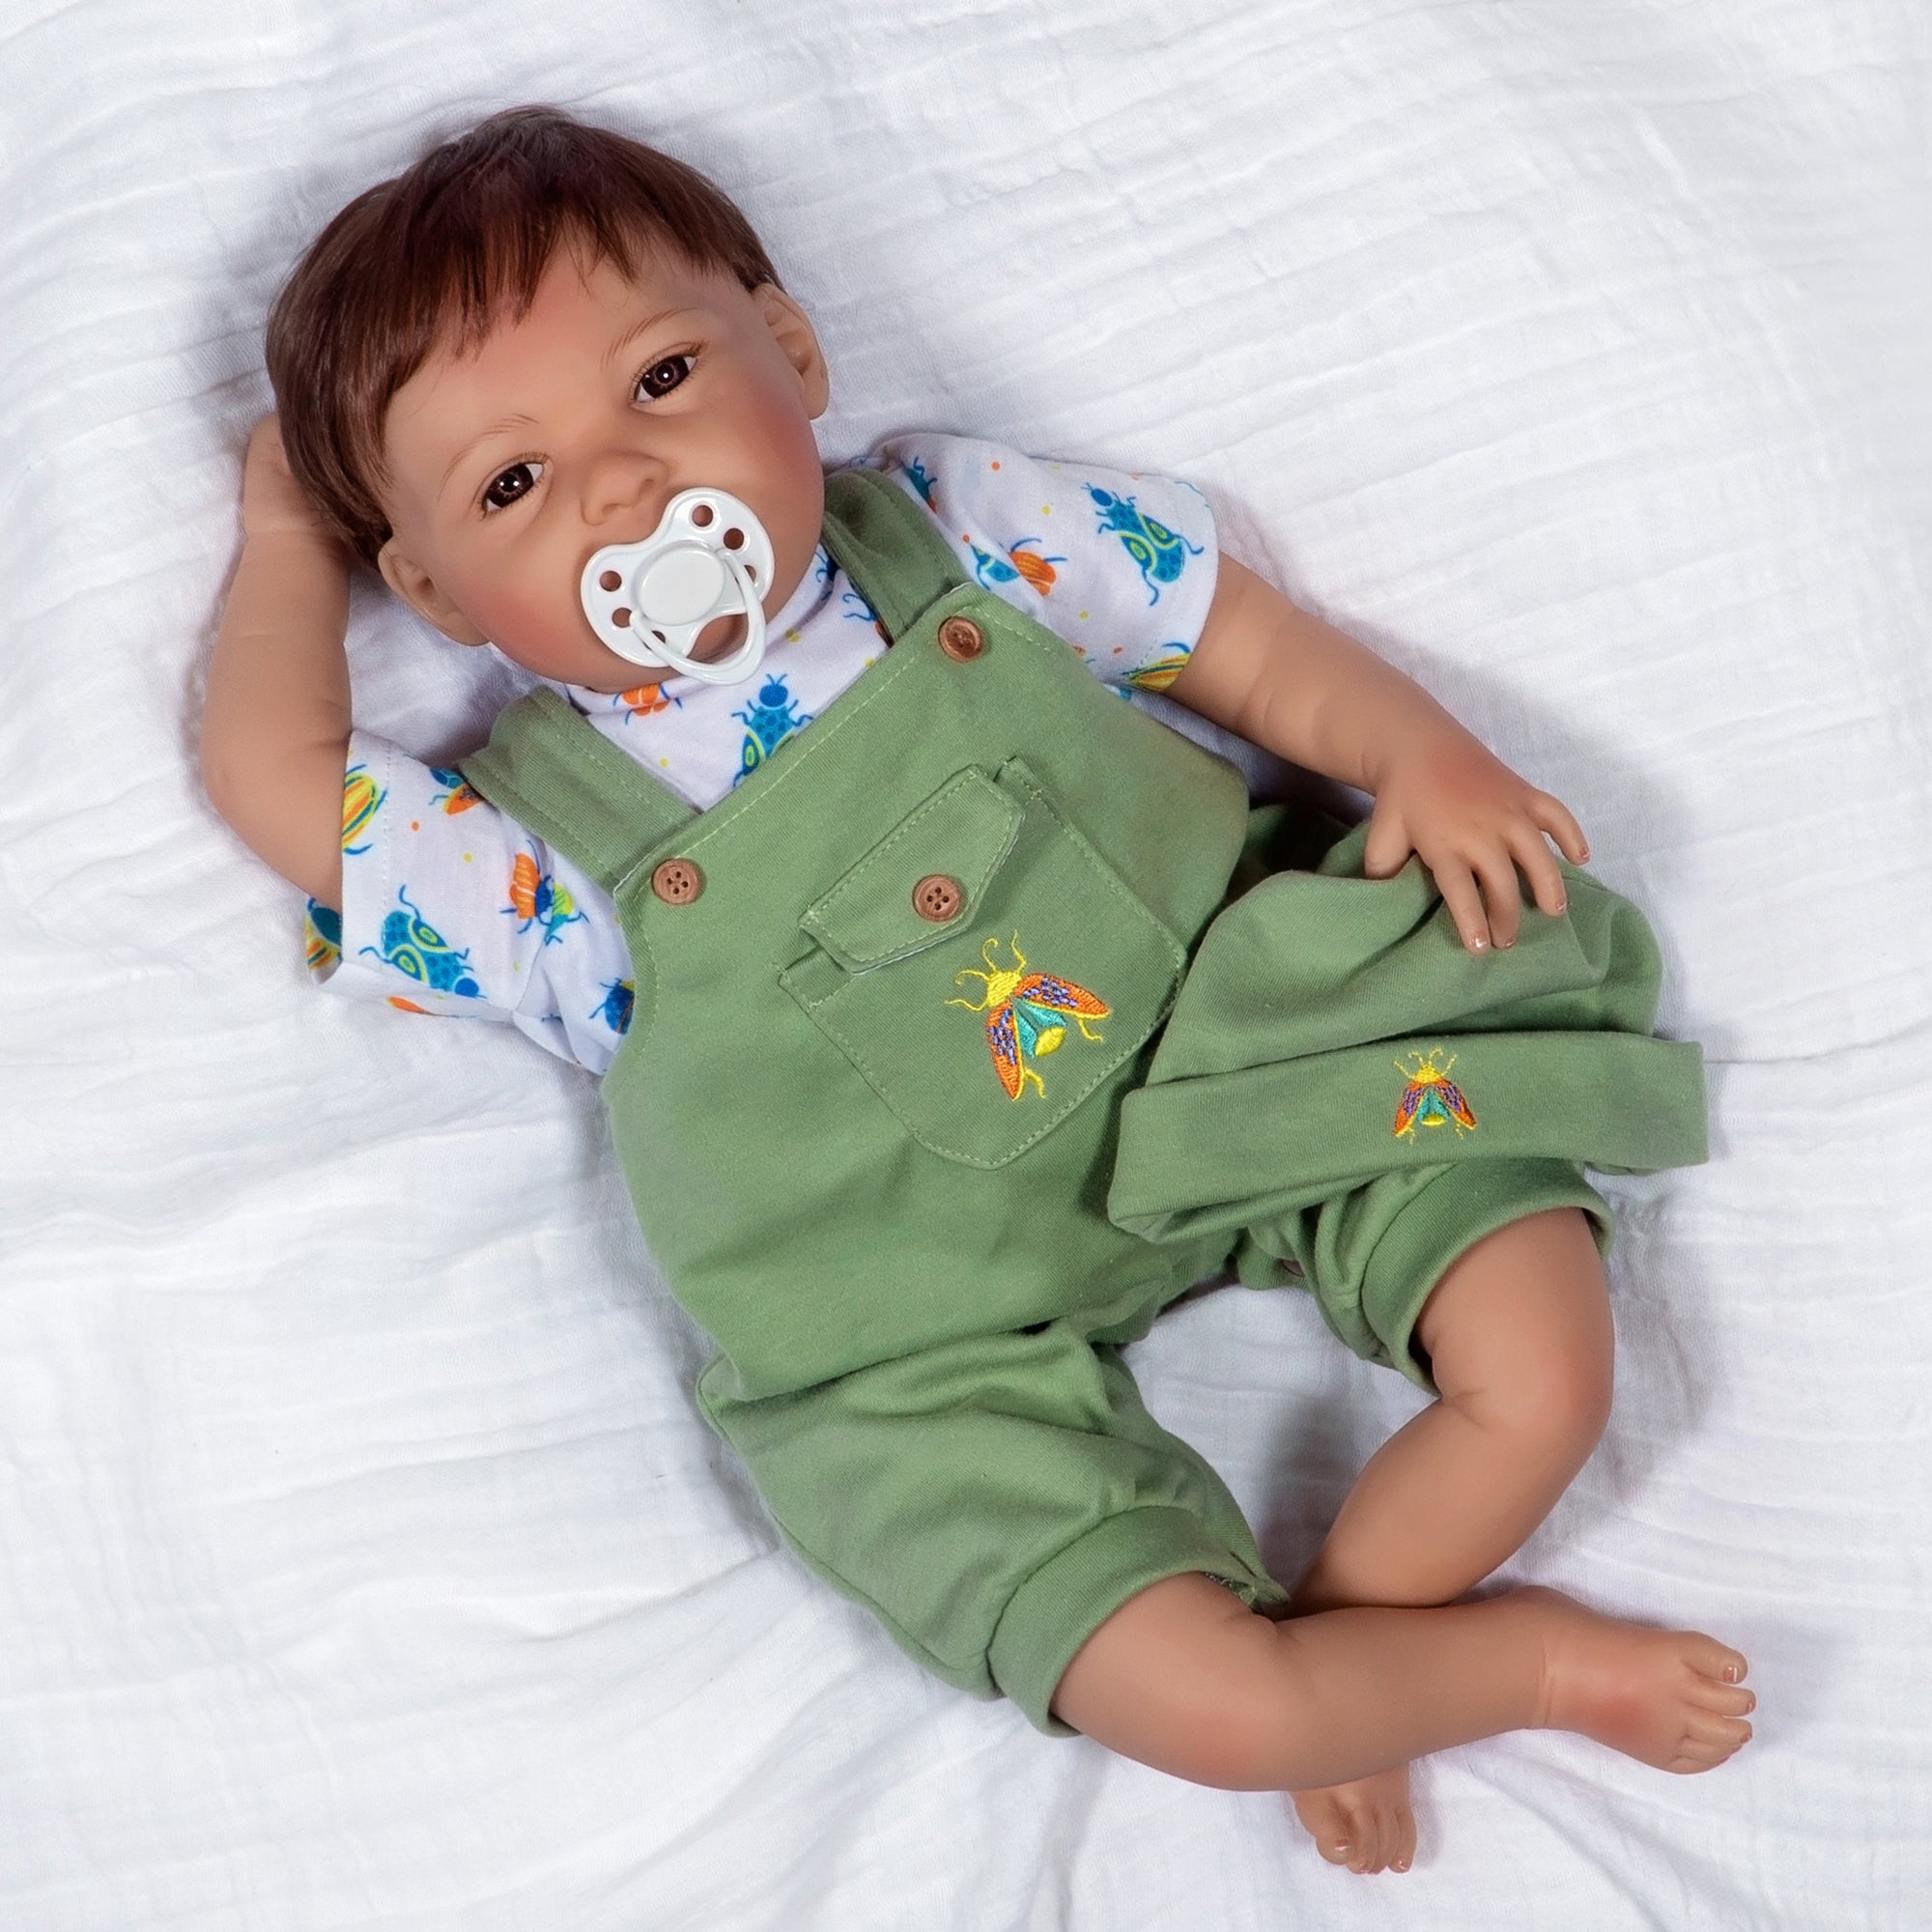 21 inch realistic toddler boy doll sculpted by doll artist Jannie de Lange. Crafted from our GentleTouch™ vinyl that gives that decadently soft and luxurious feel of real, baby-smooth skin, and comes with a weighted cloth body that features a more tapered realistic look and weighted bean bag bottom.